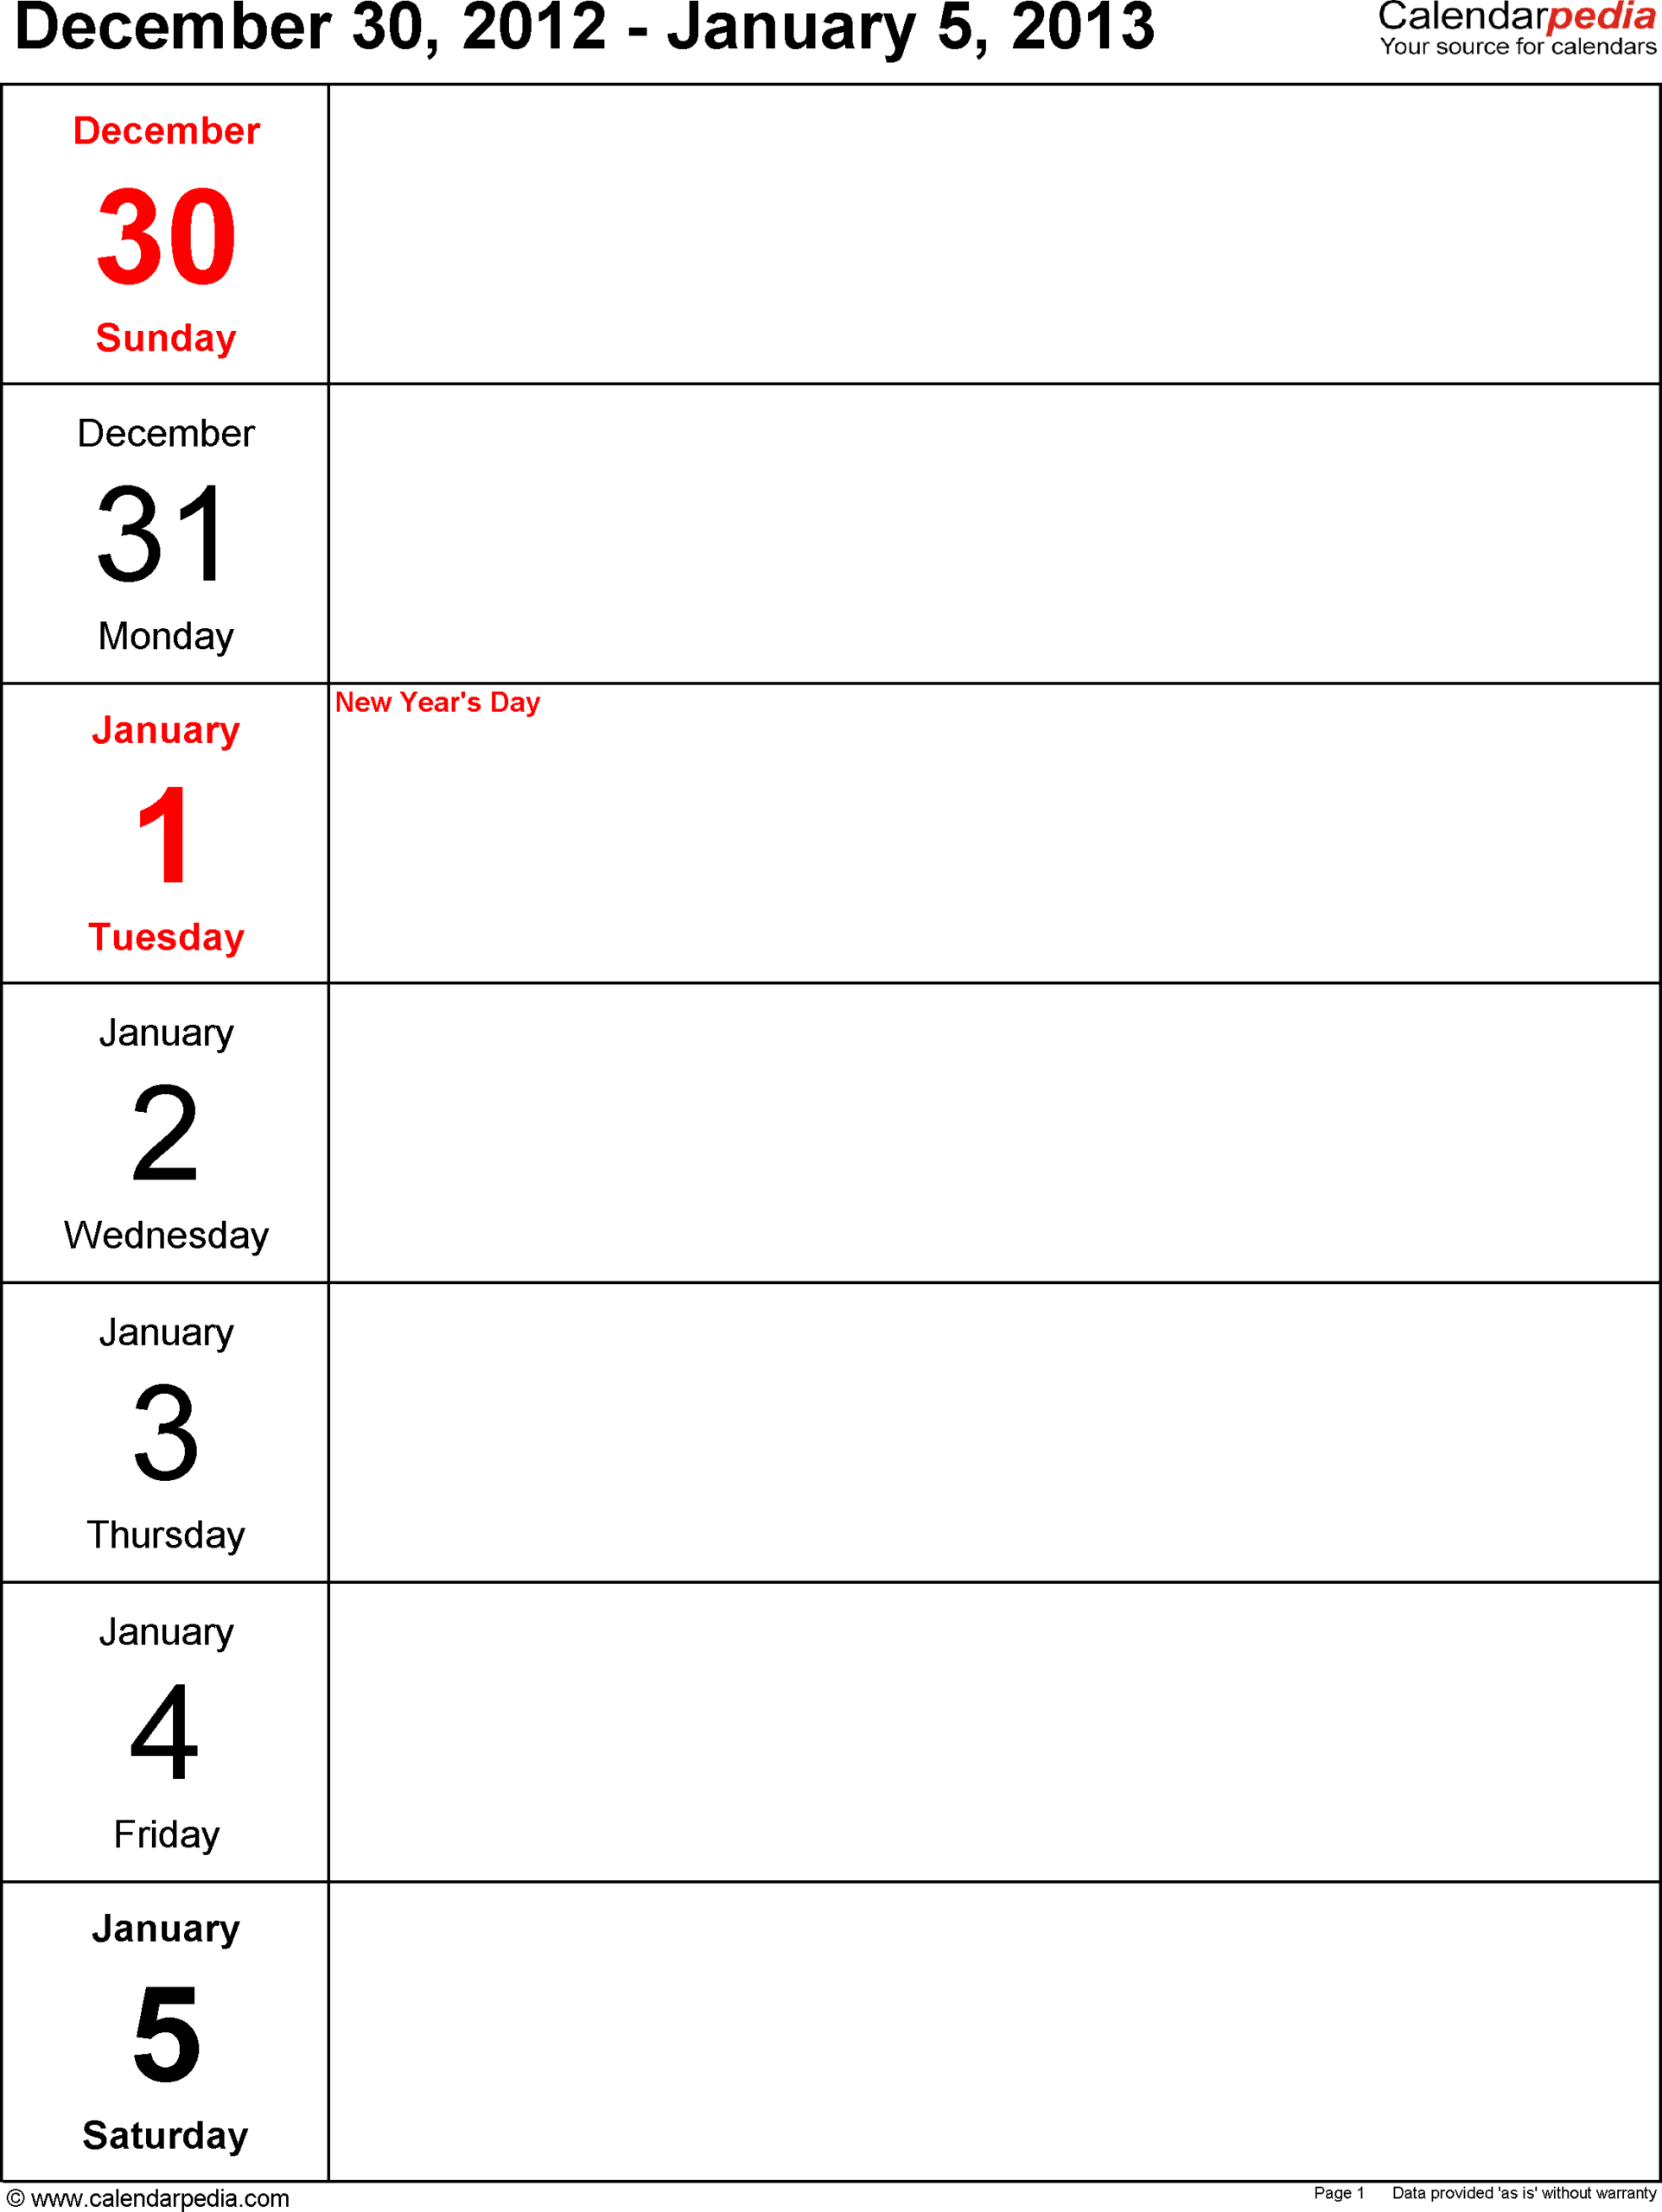 Weekly Calendars 2013 For Excel 4 Free Printable Templates